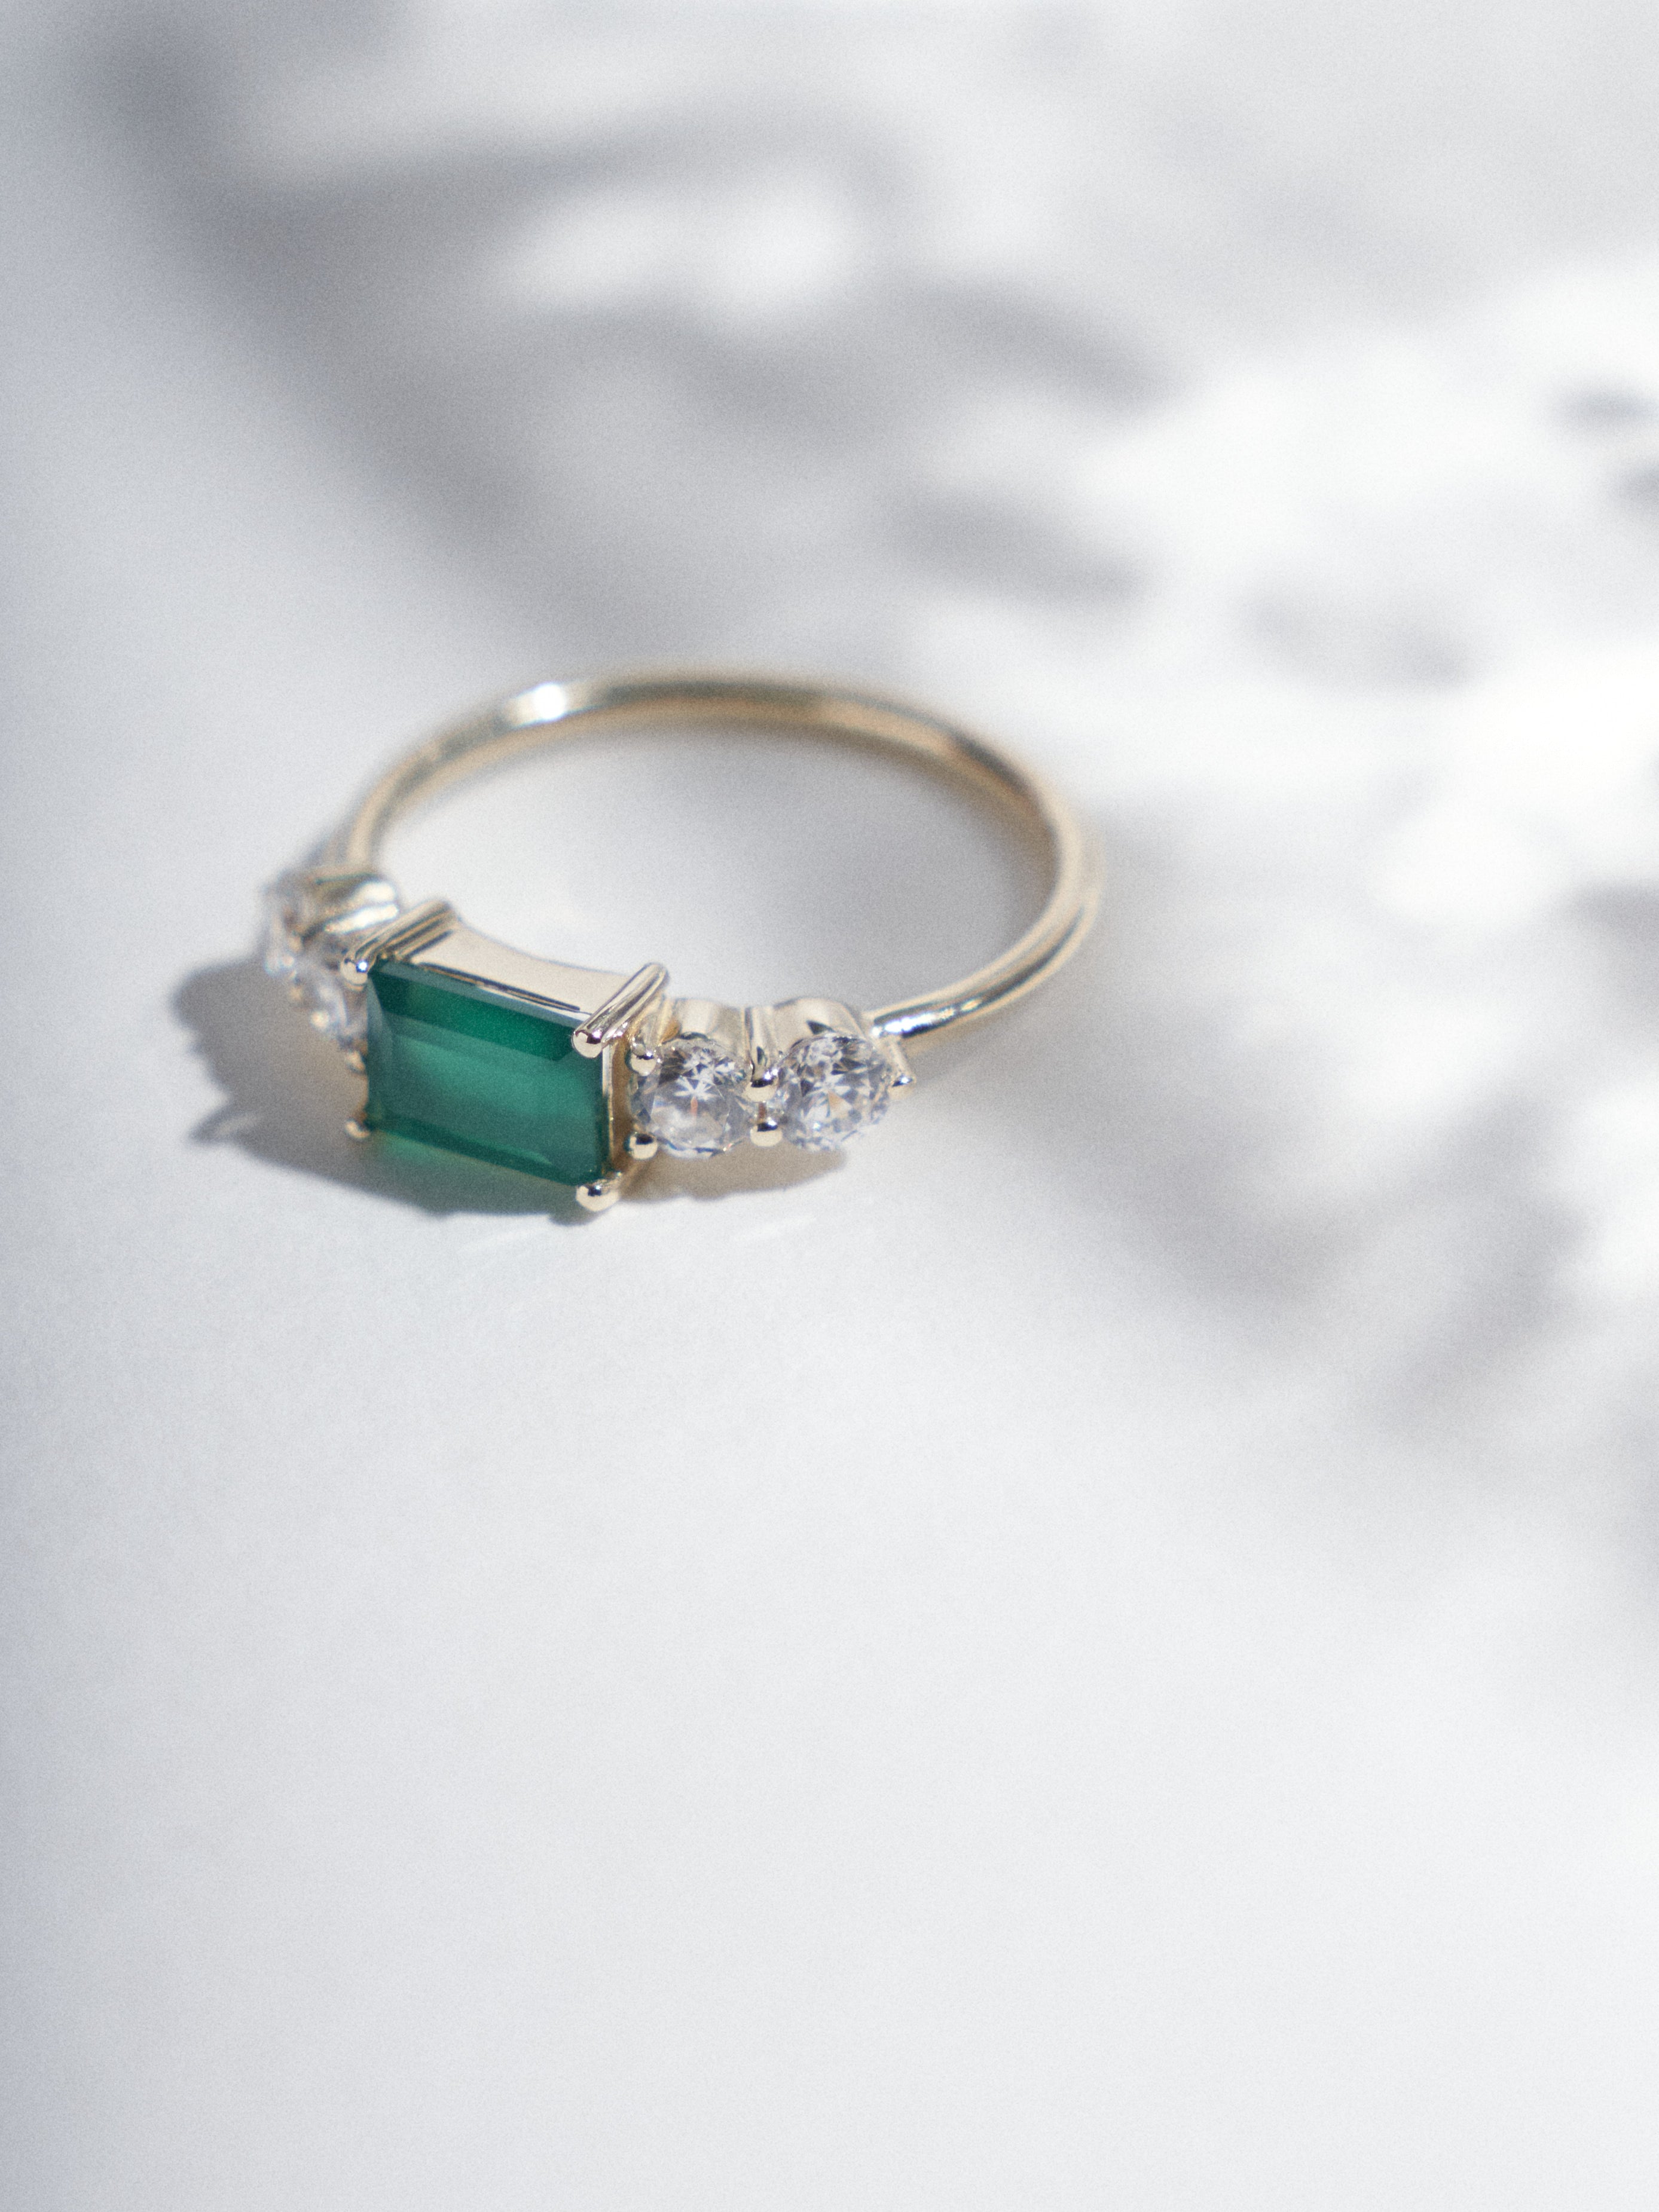 Green Onyx and moissanite ring.